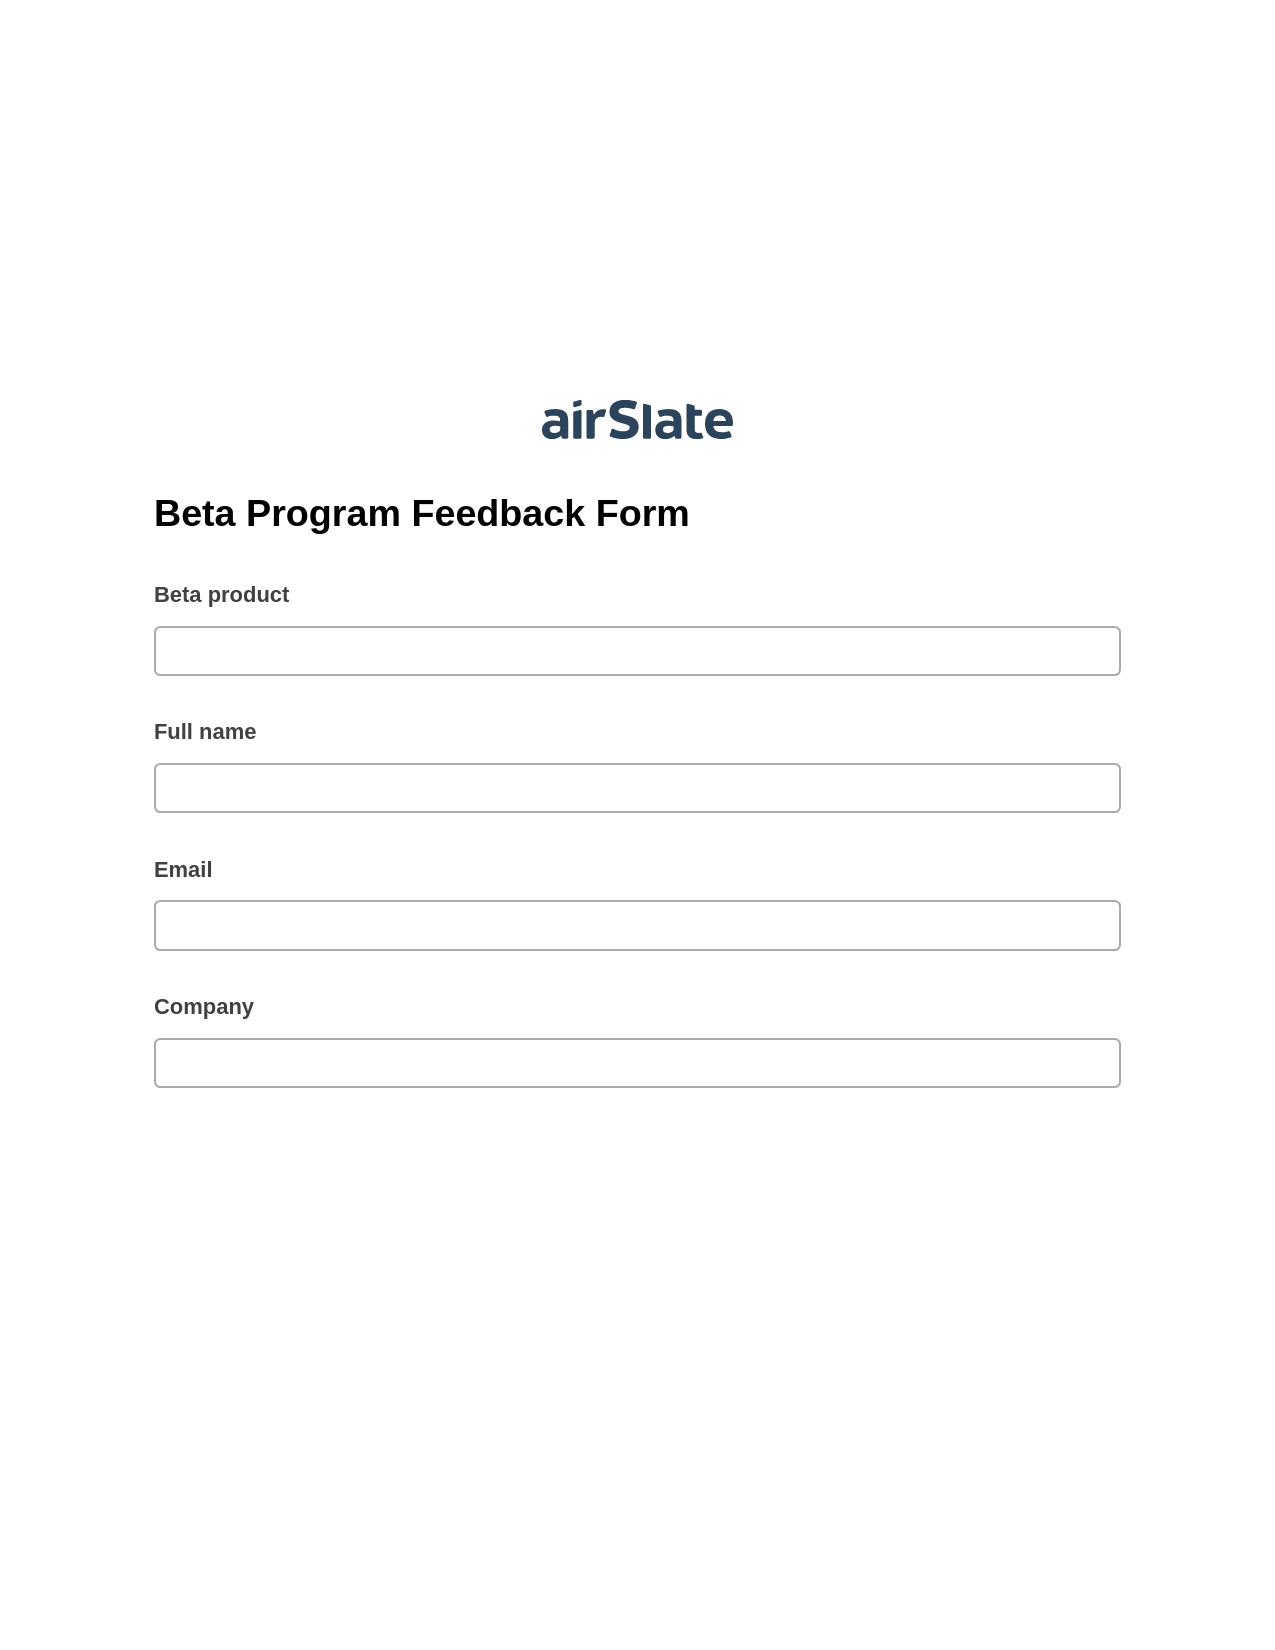 Multirole Beta Program Feedback Form Pre-fill from Excel Spreadsheet Bot, Remove Tags From Slate Bot, Export to Smartsheet